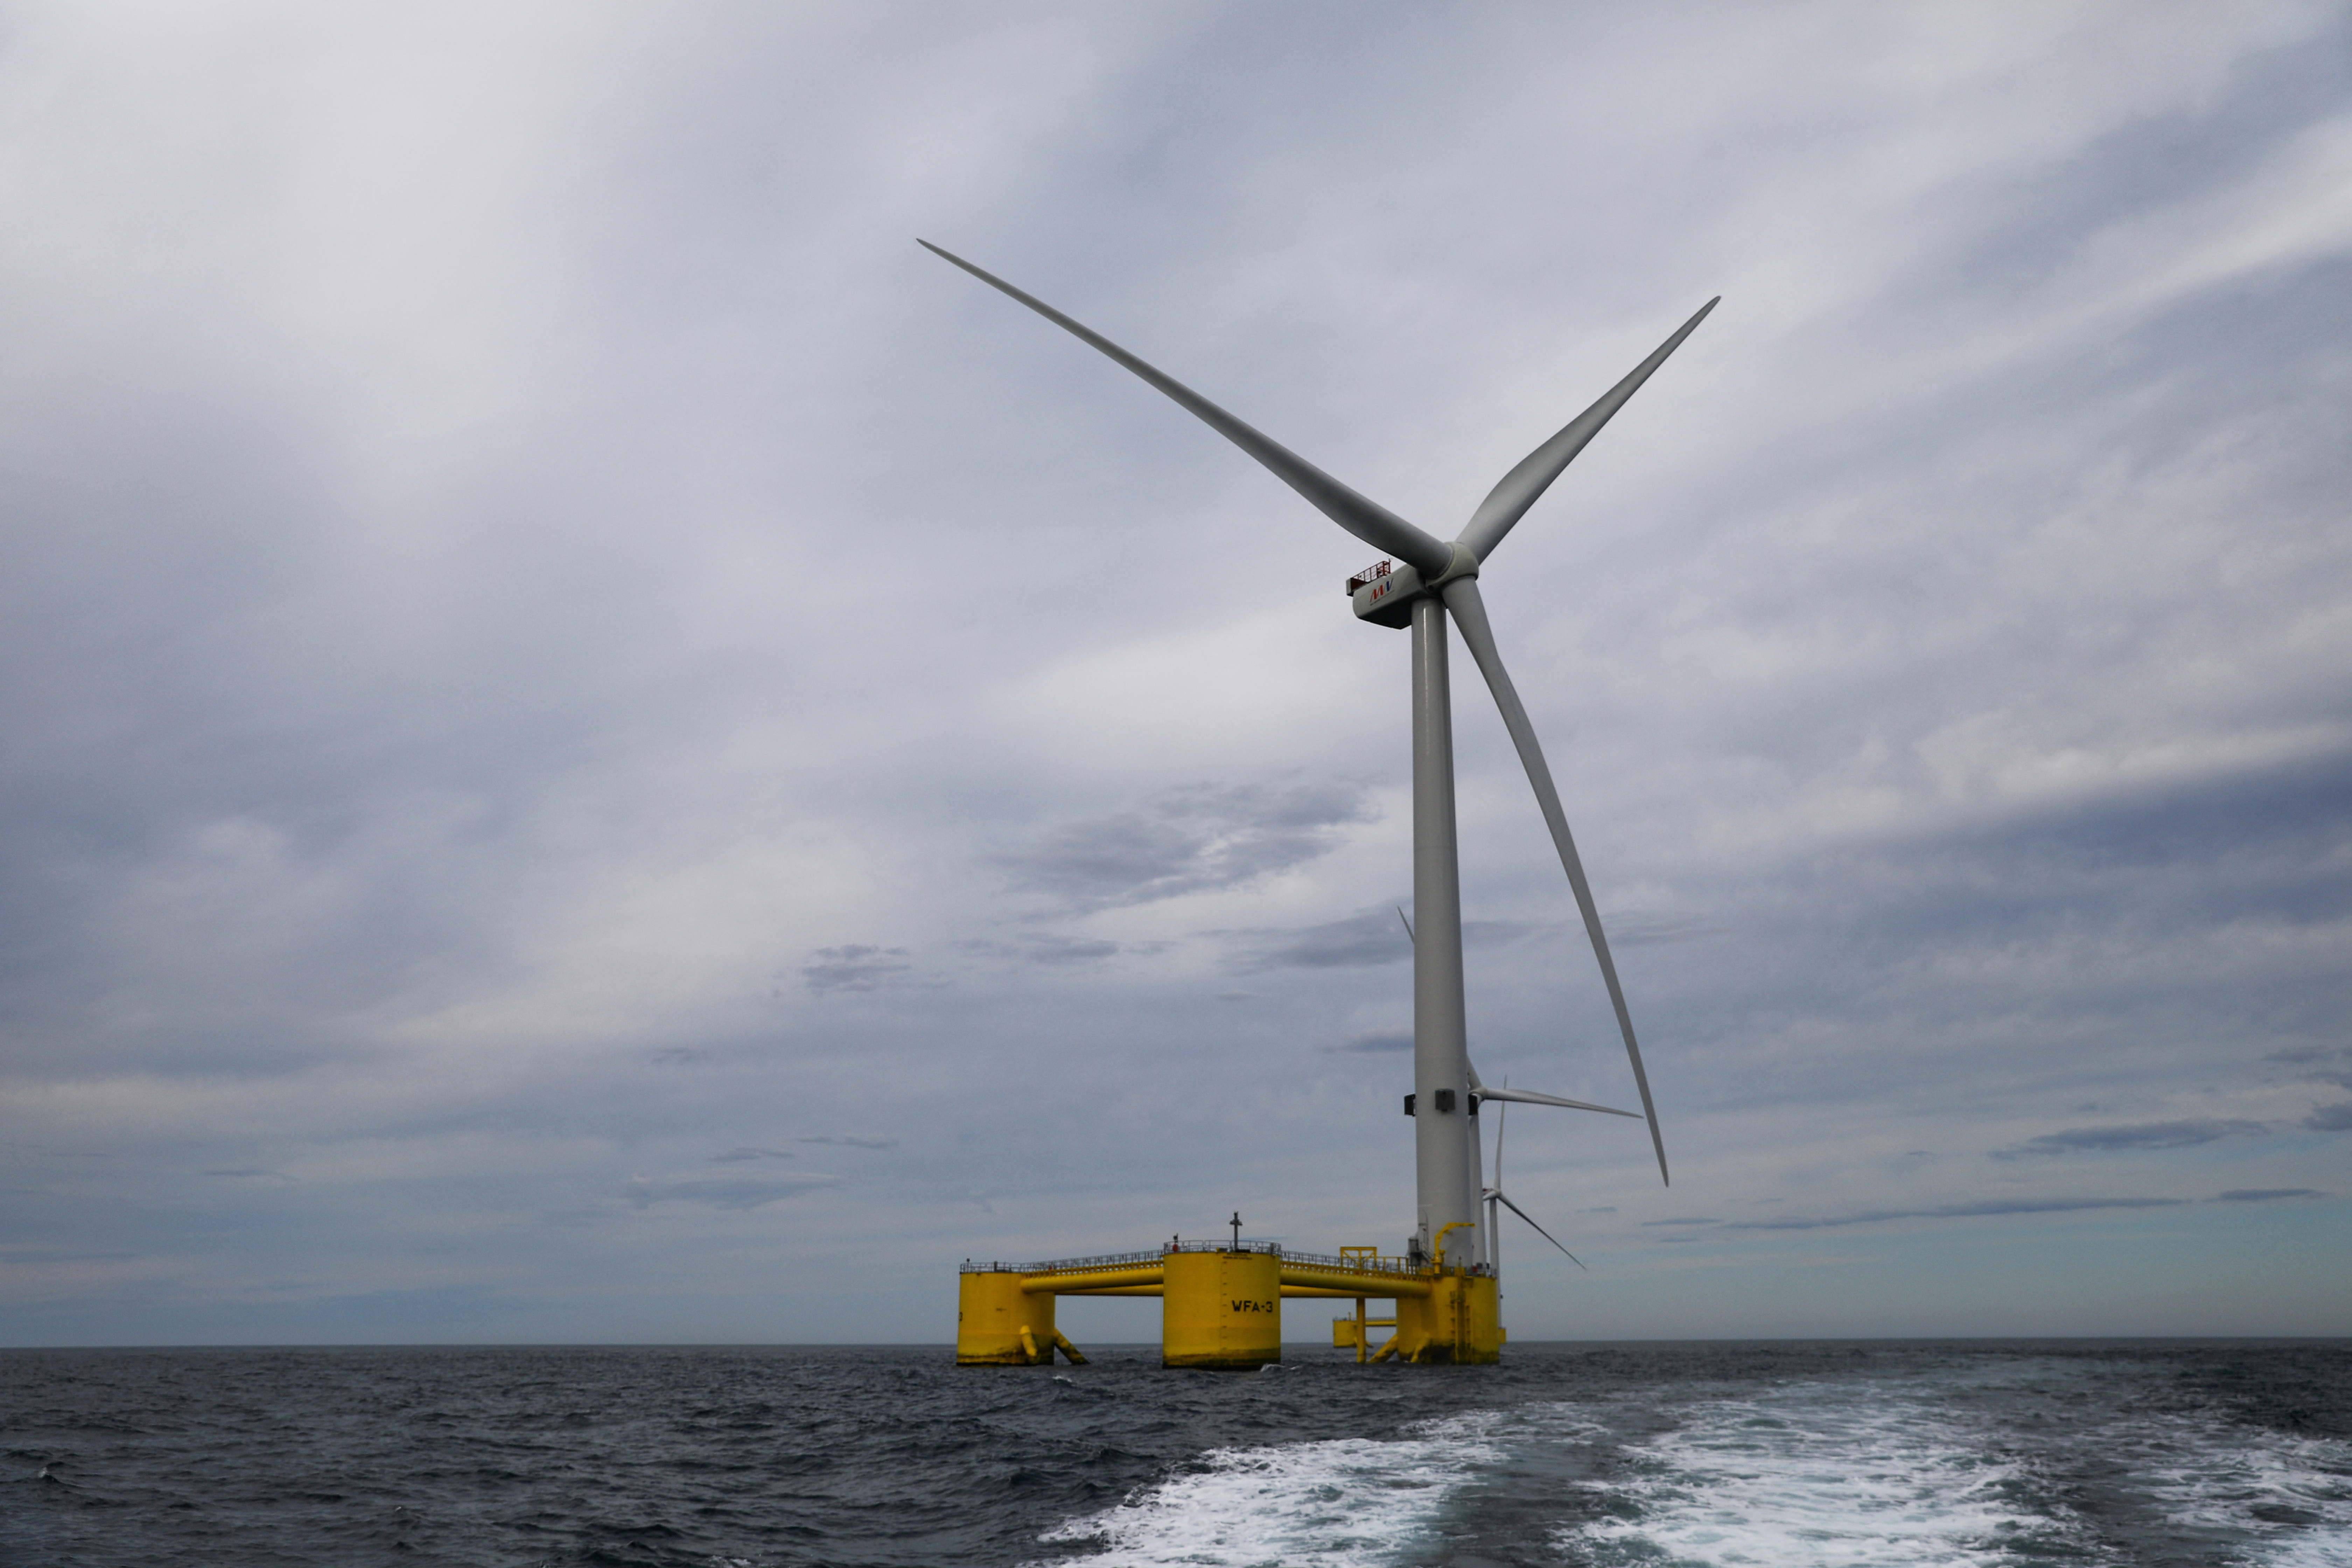 Turbines of the WindFloat Atlantic Project, a floating offshore wind-power generating platform, are seen 20 kilometers off the coast in Viana do Castelo